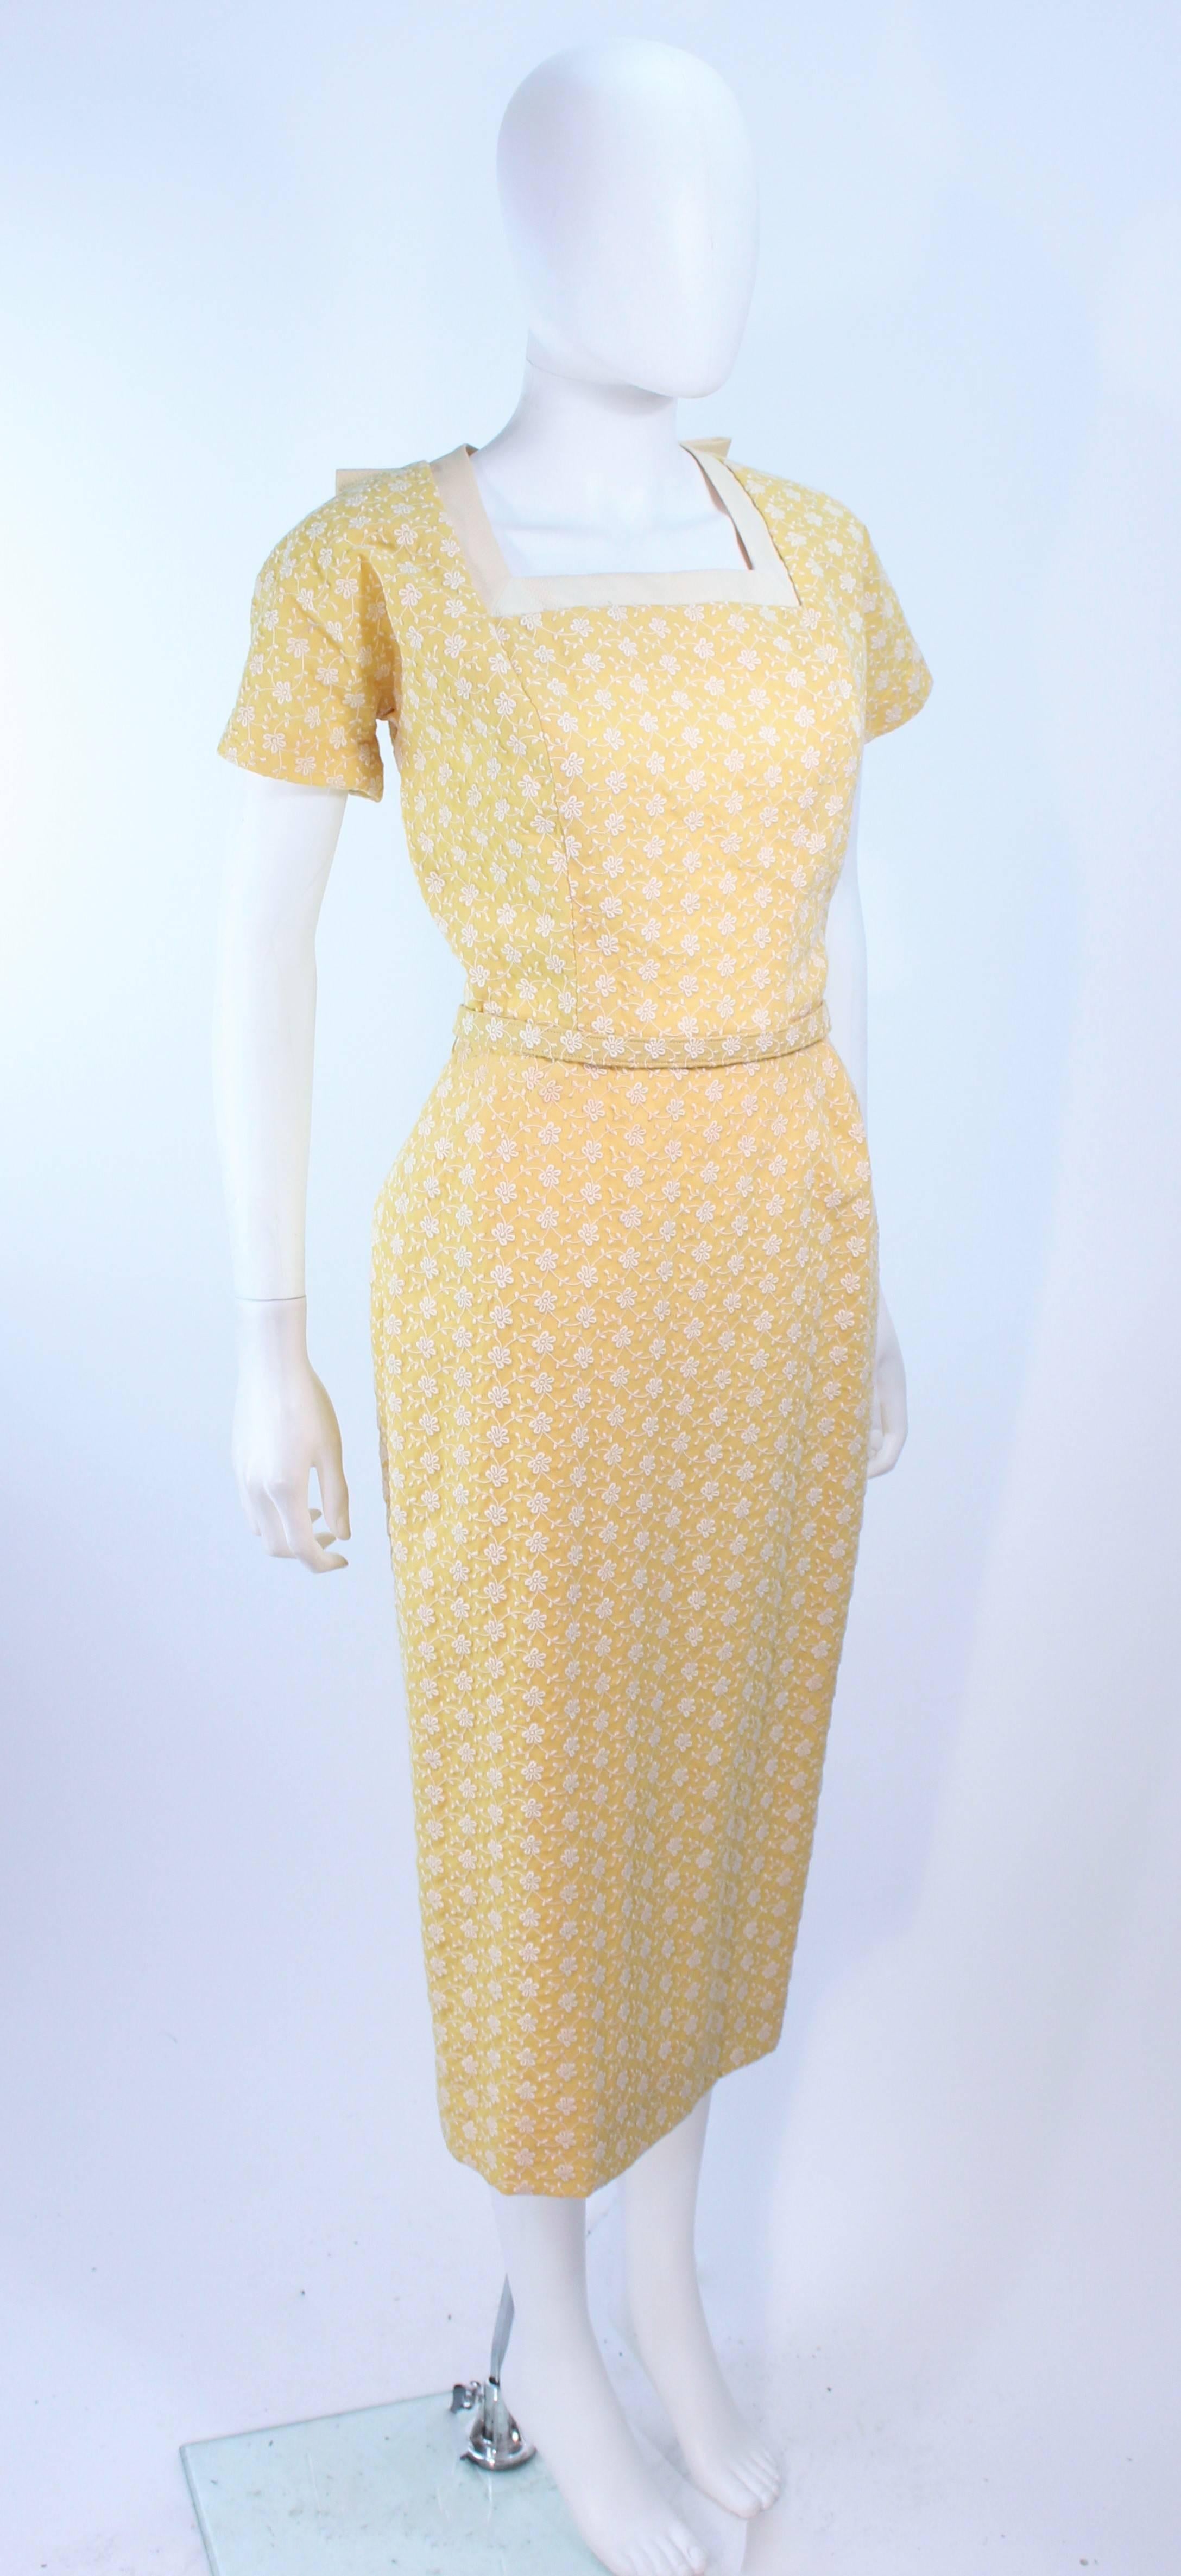 This Don Loper design is composed of a yellow embroidered floral print fabric. Features a center back of the neck bow. There is a center back zippre closure. In excellent vintage condition.

**Please cross-reference measurements for personal